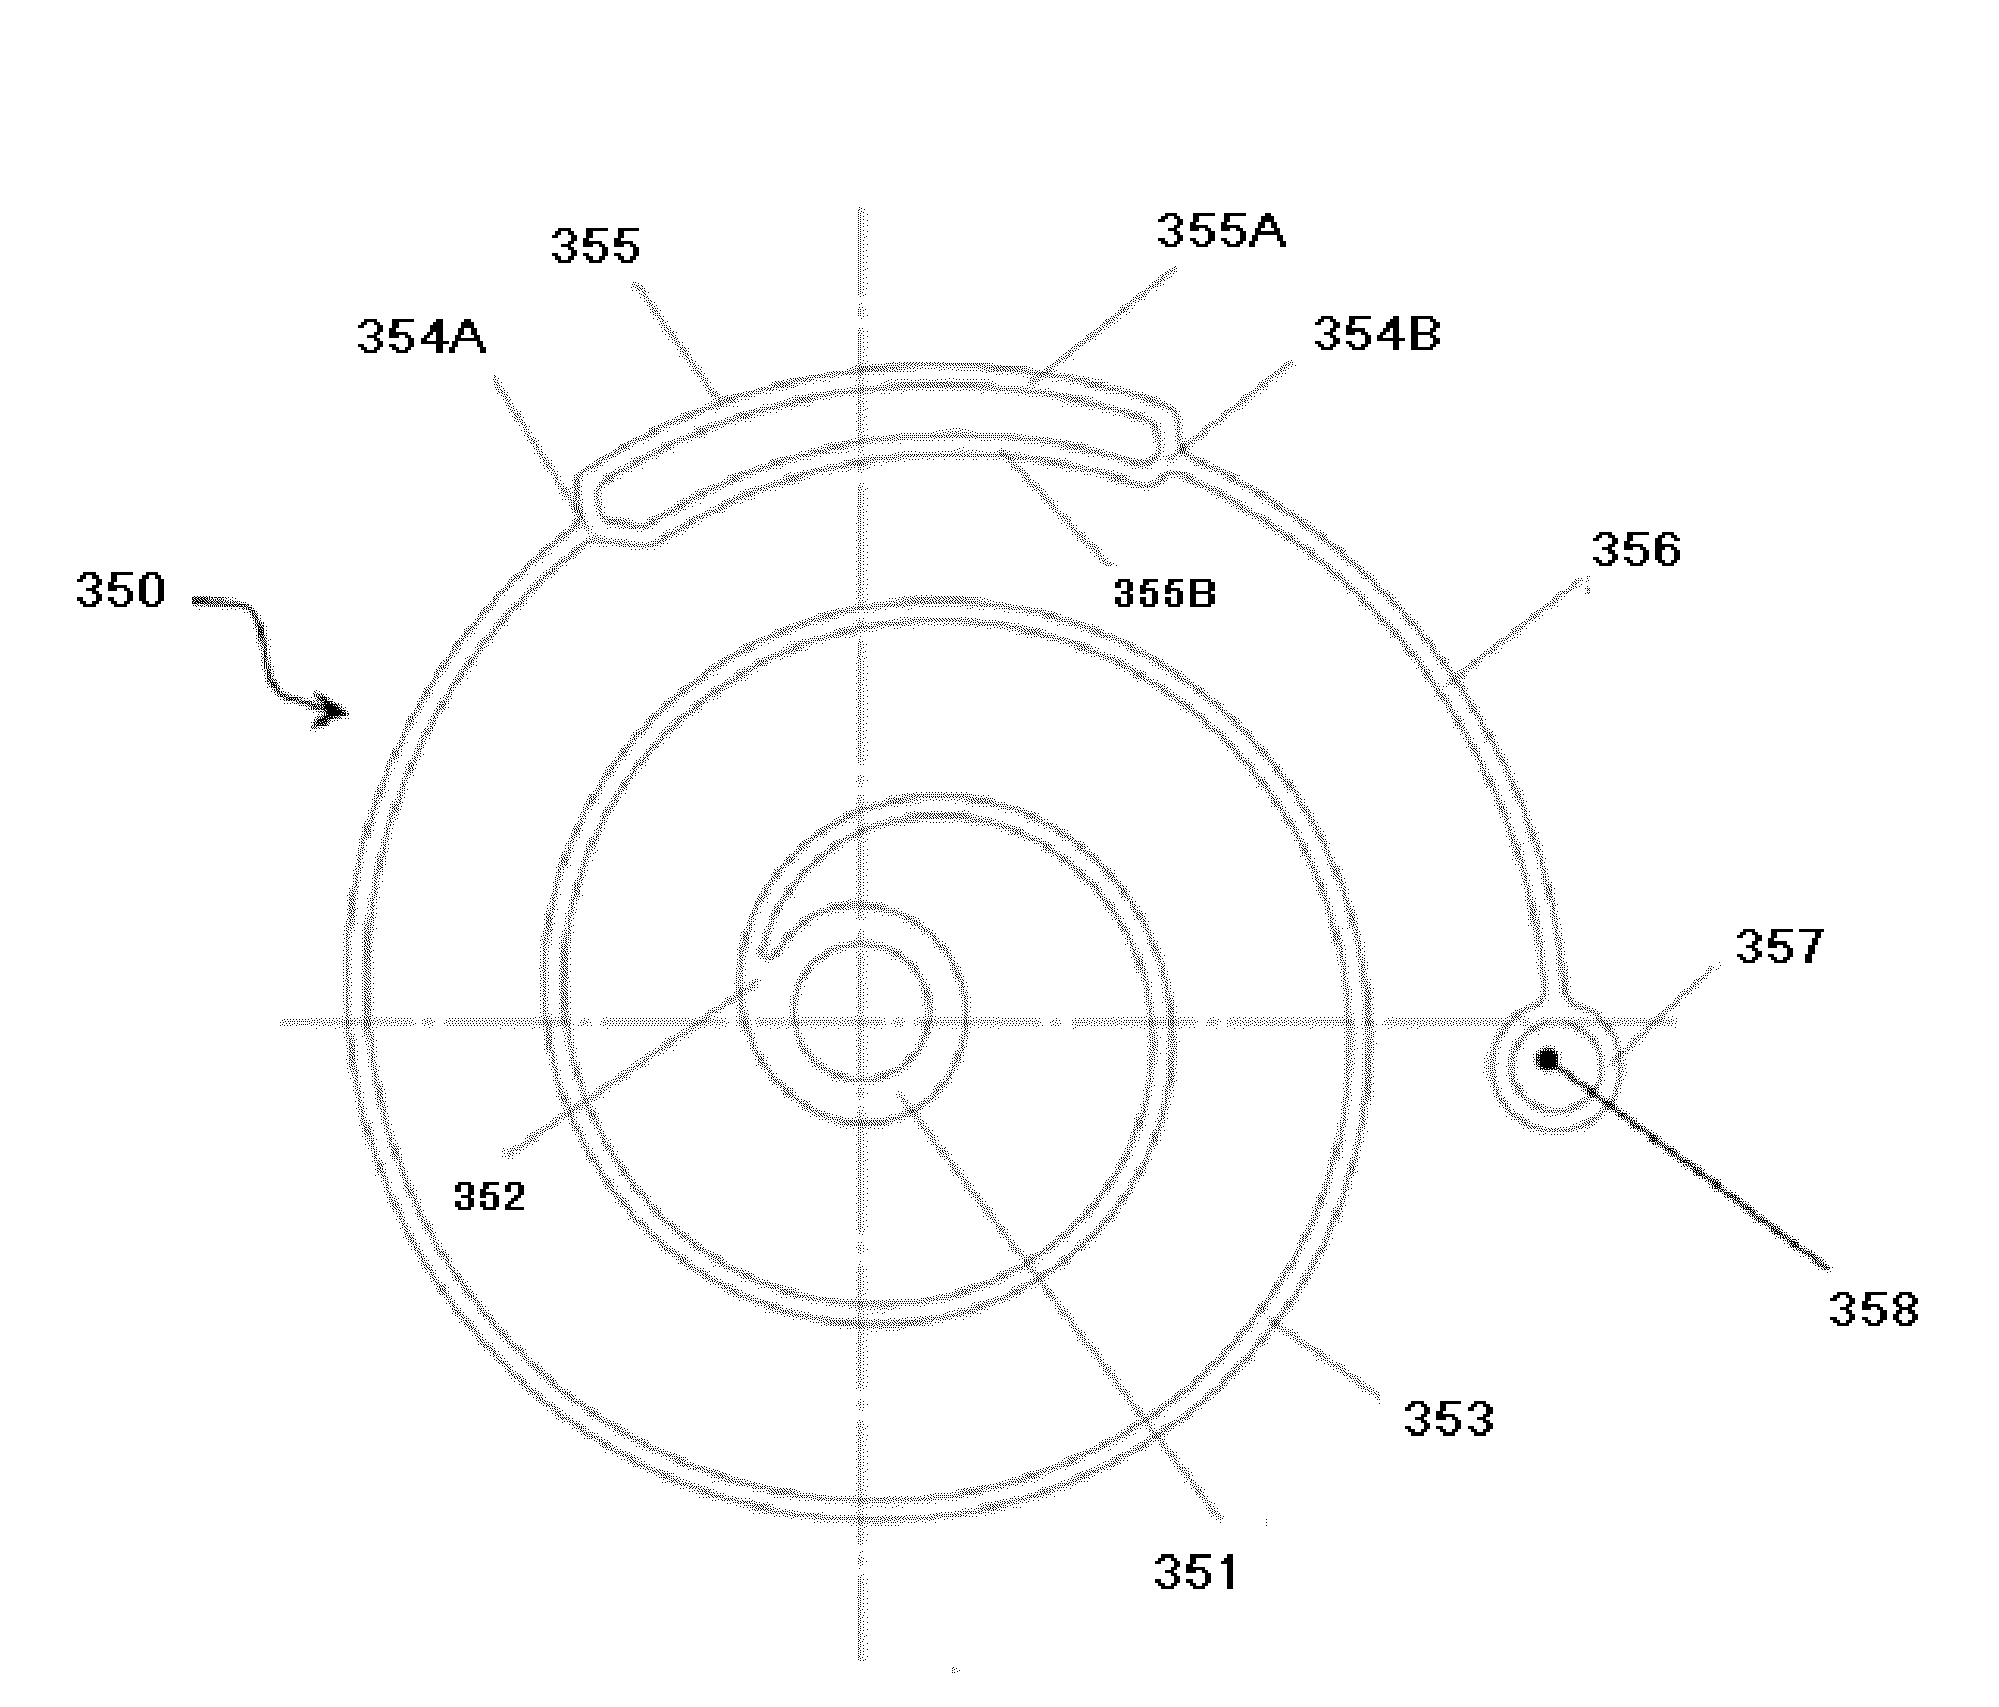 Hairspring for a time piece and hairspring design for concentricity